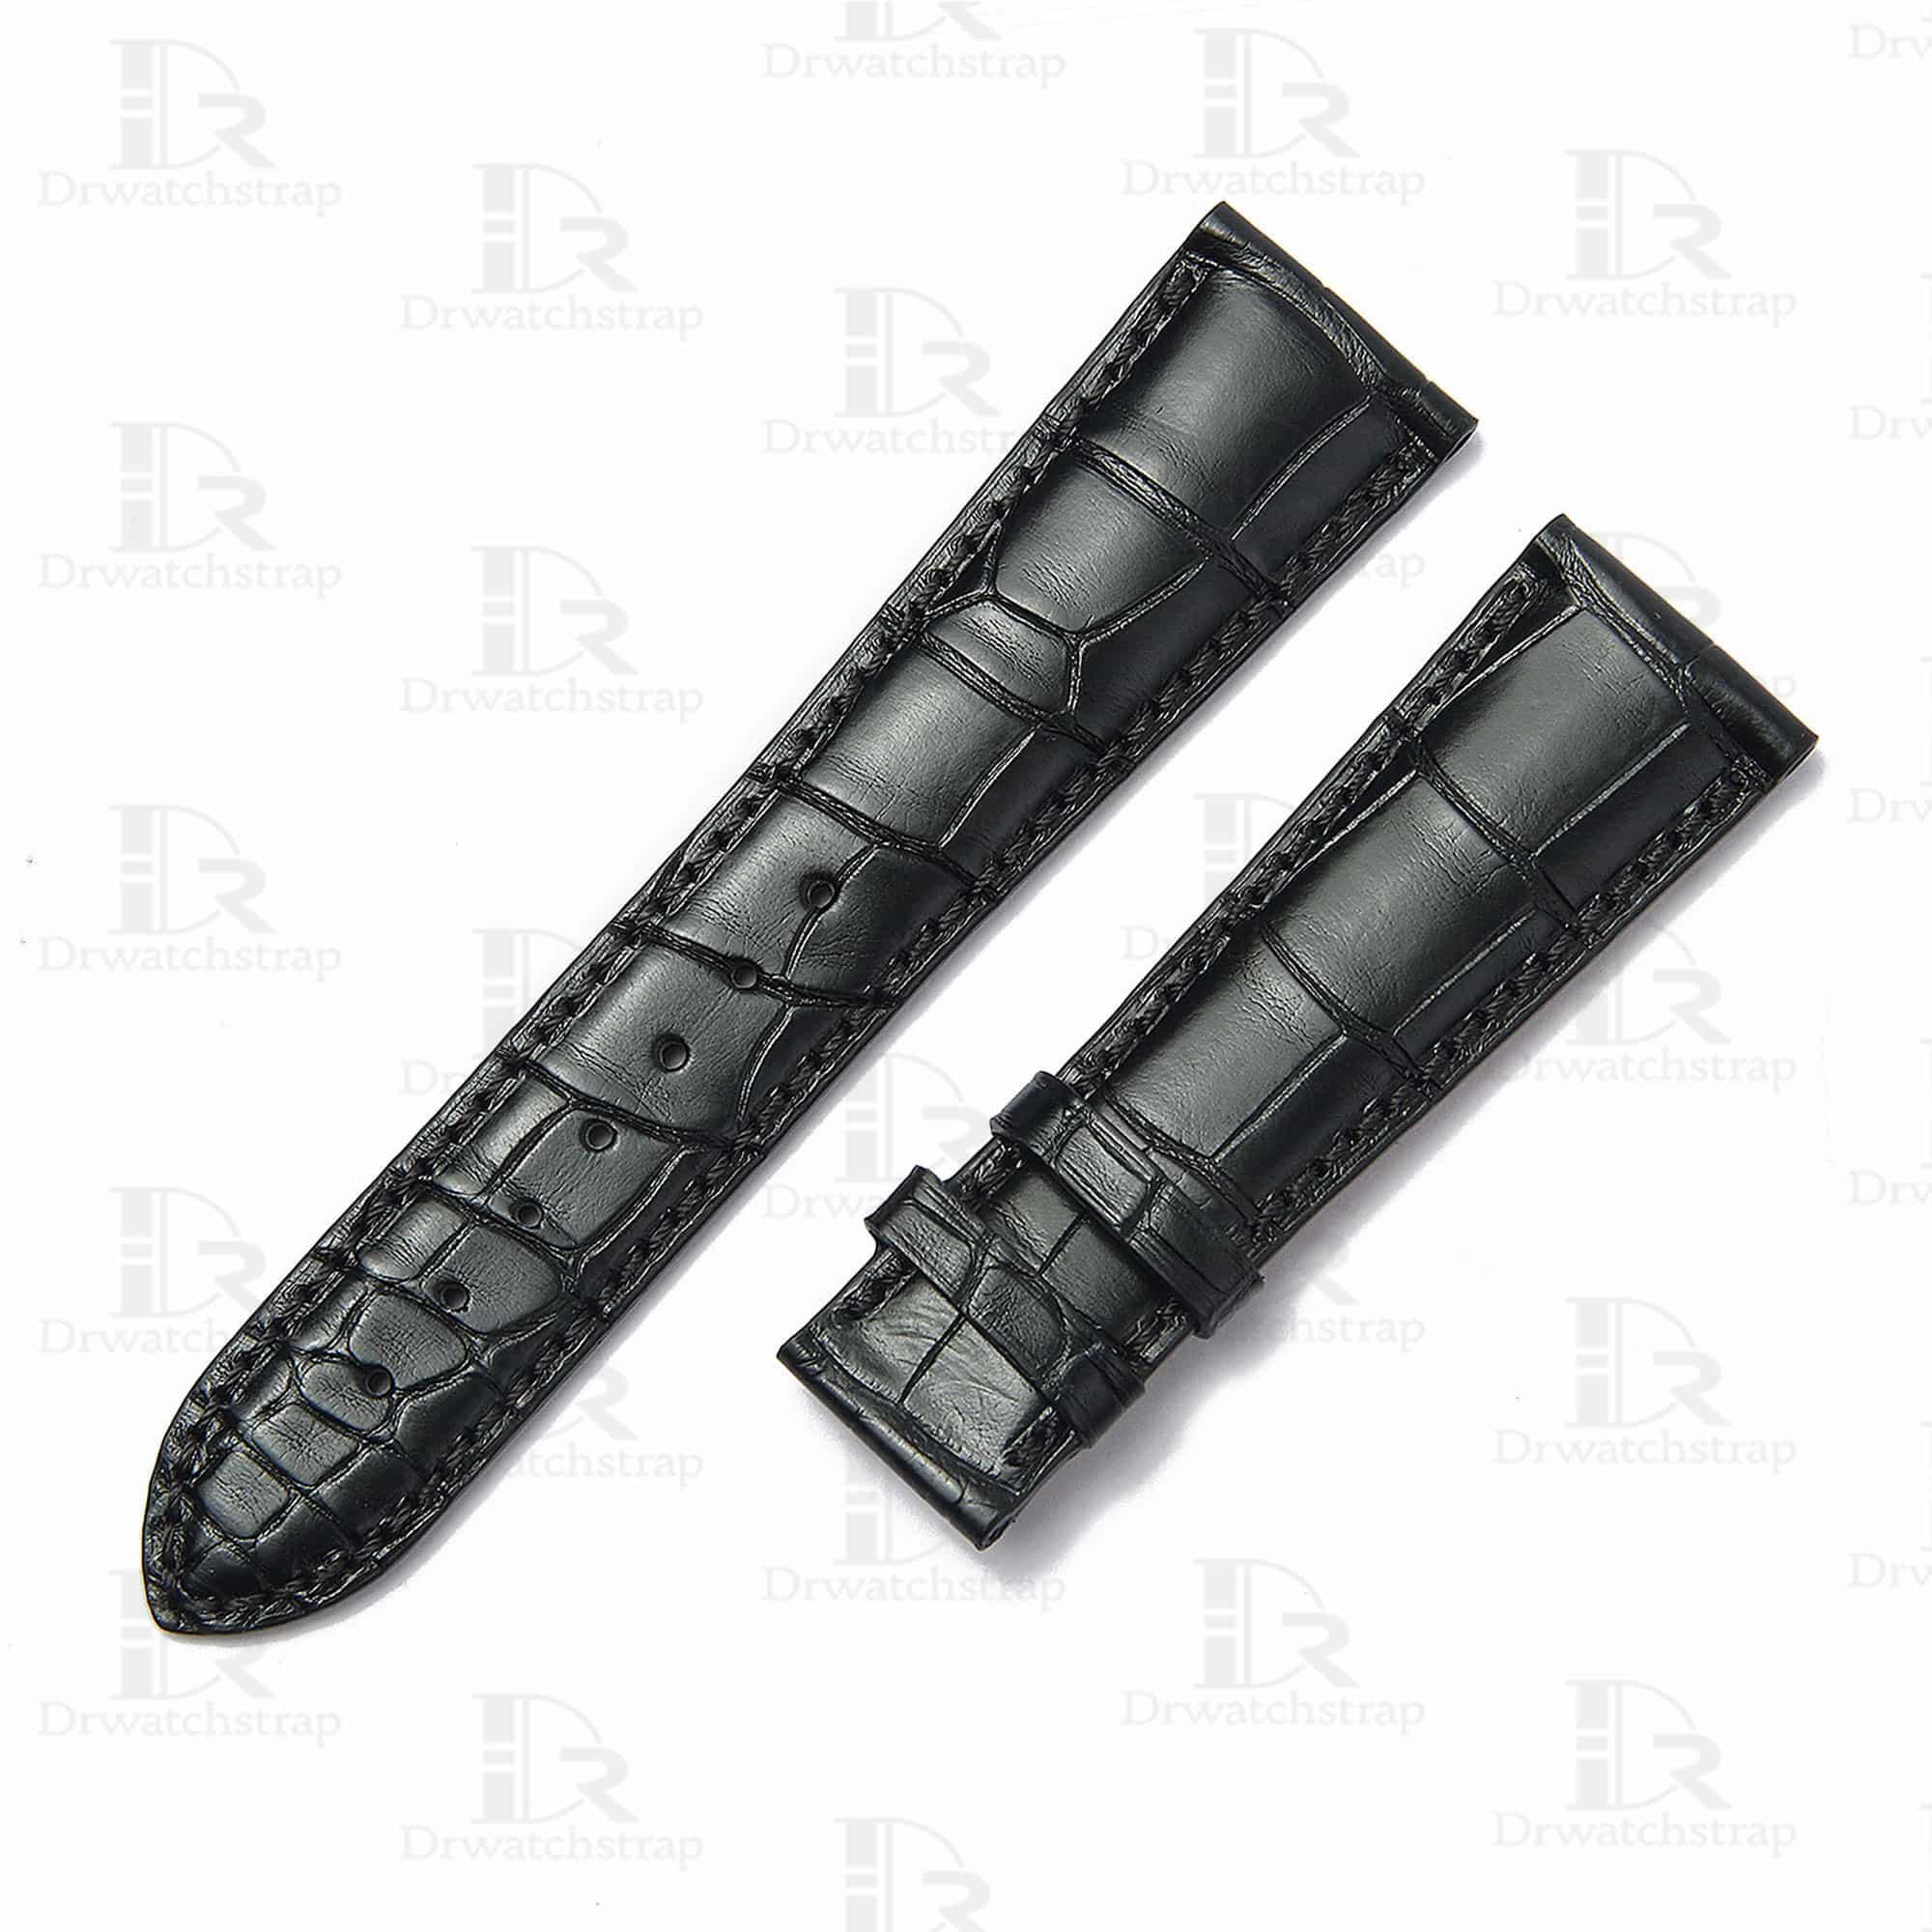 Buy Custom black Alligator leather watch strap for Grand Seiko band replacement watchband for sale